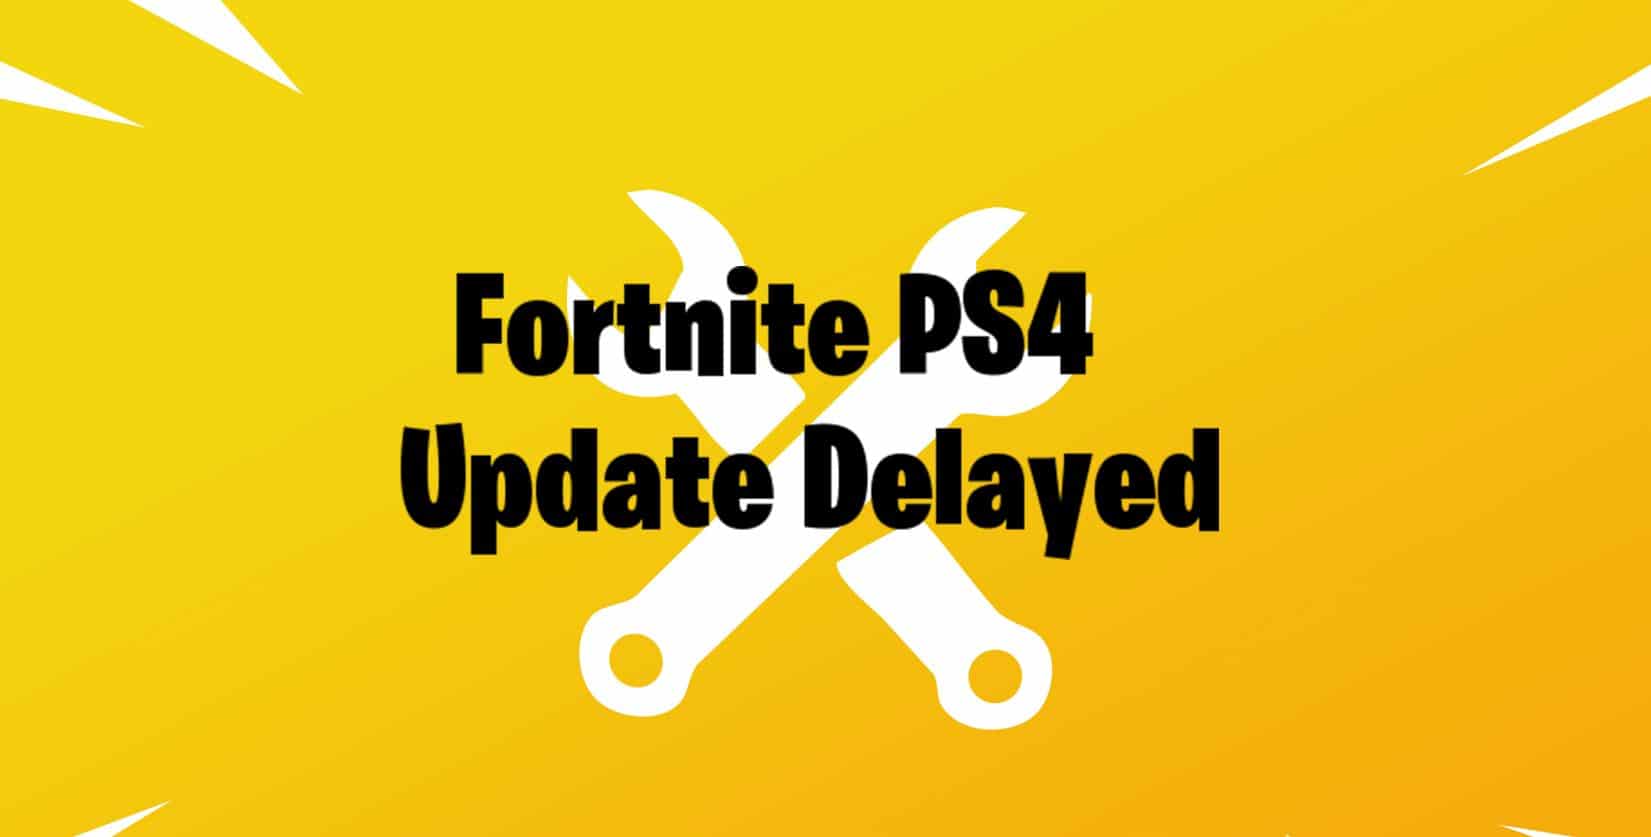 PS4 Fortnite Update Delayed